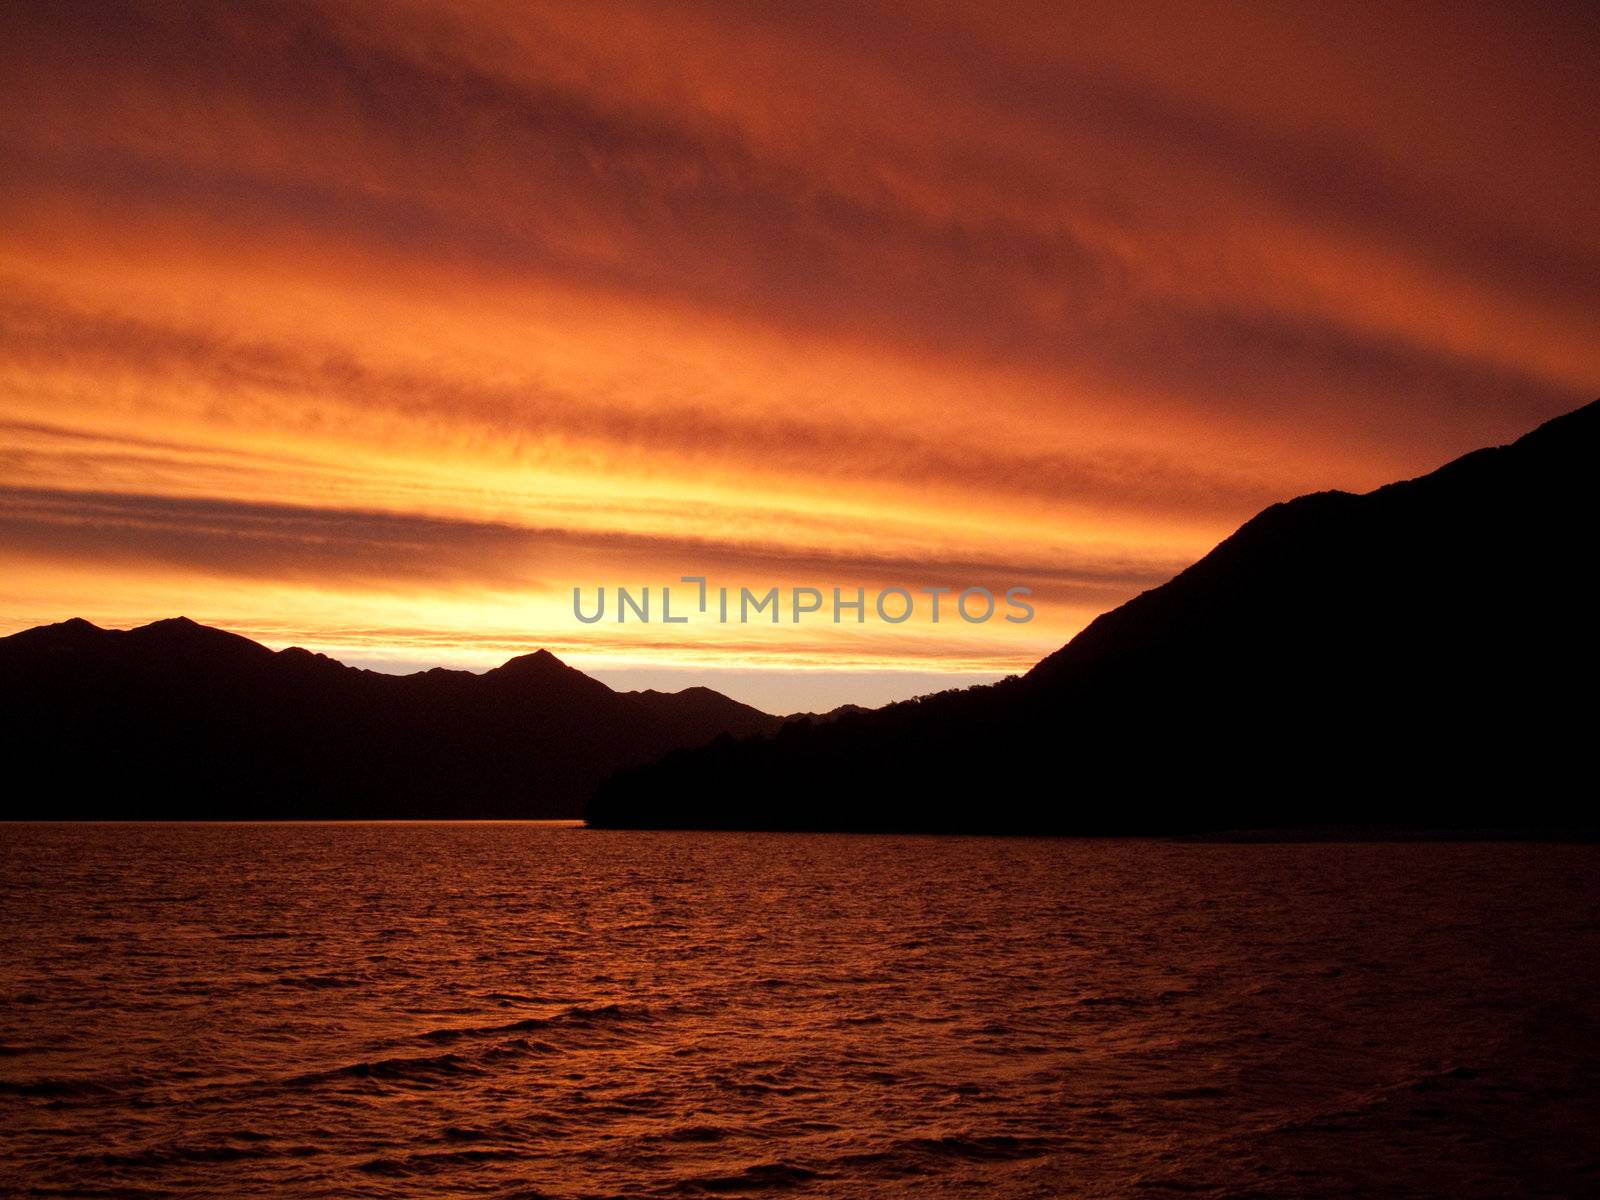 Brilliant sunset over the sea near Queenstown in New Zealand